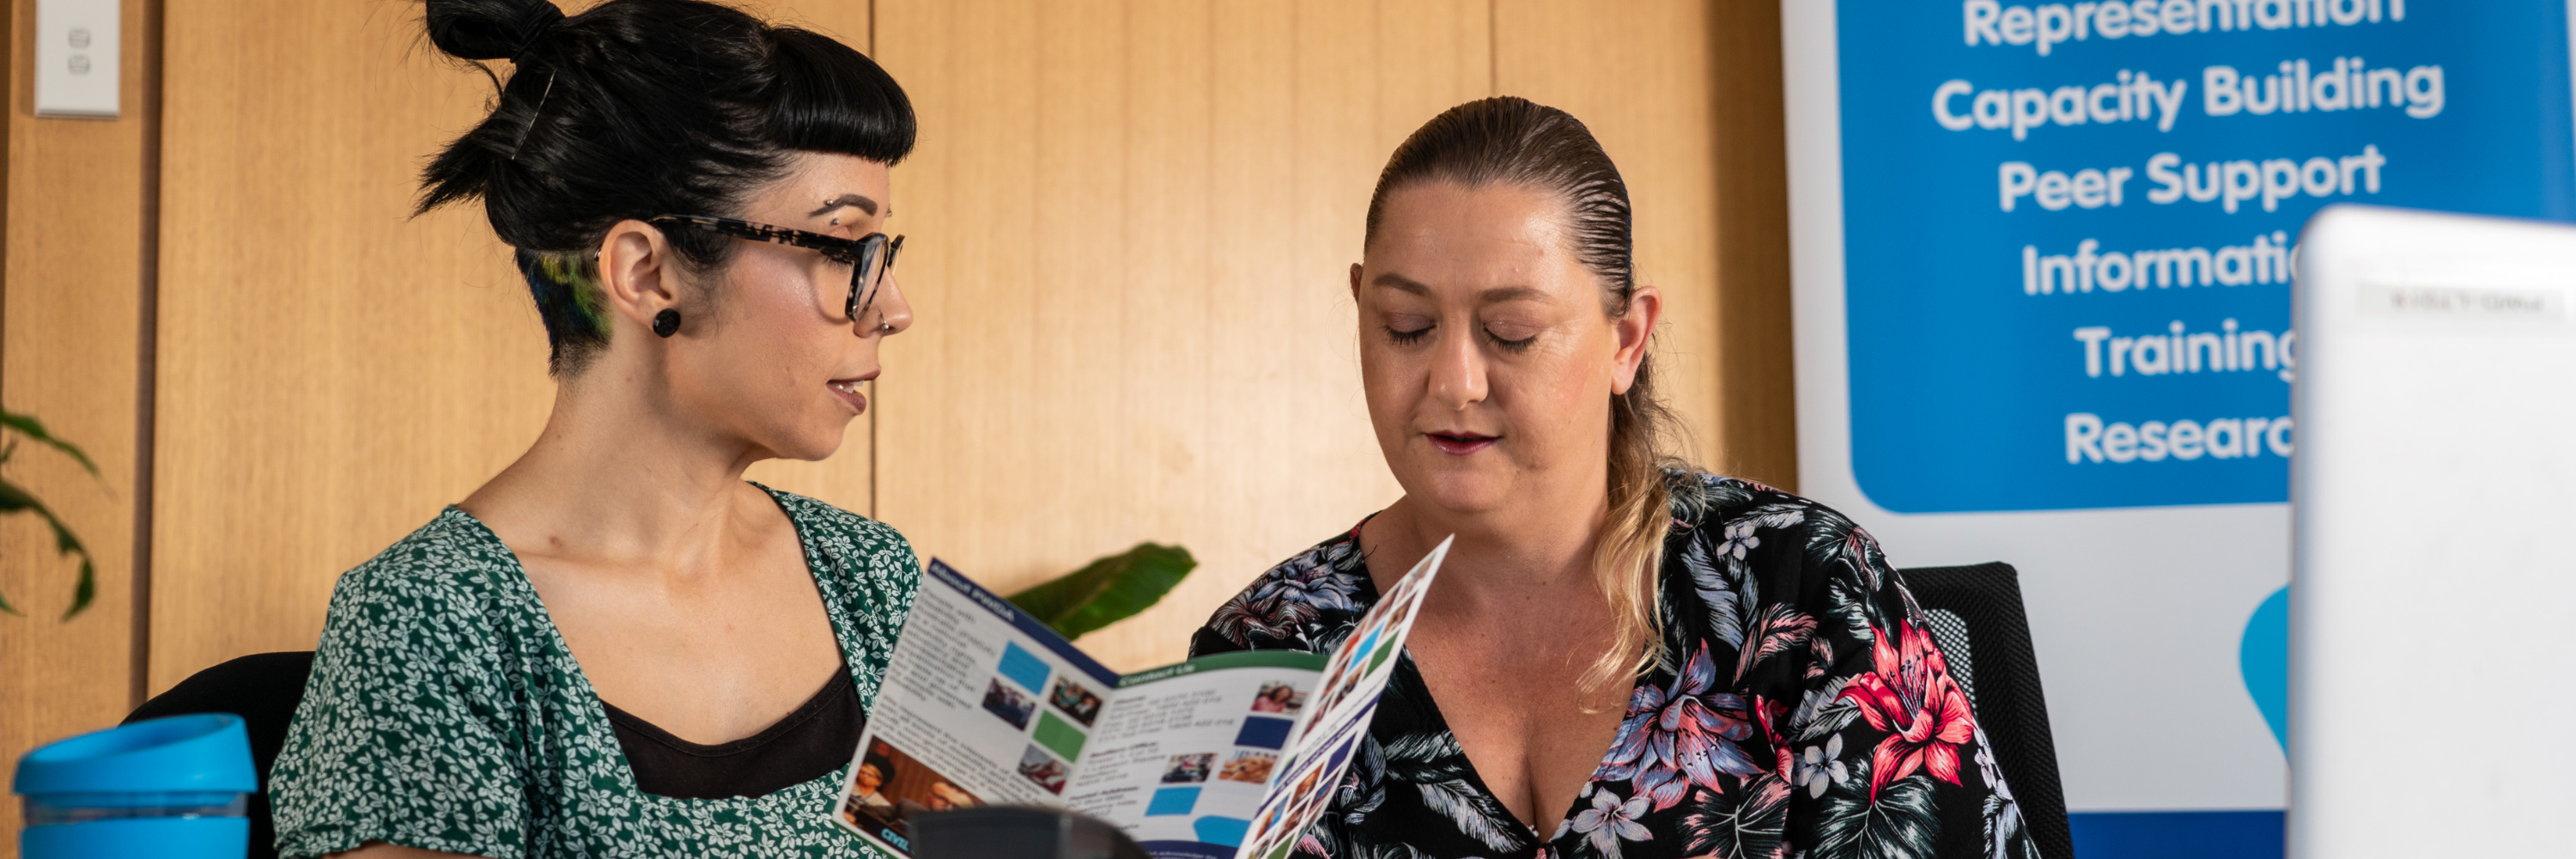 two people discussing a brochure